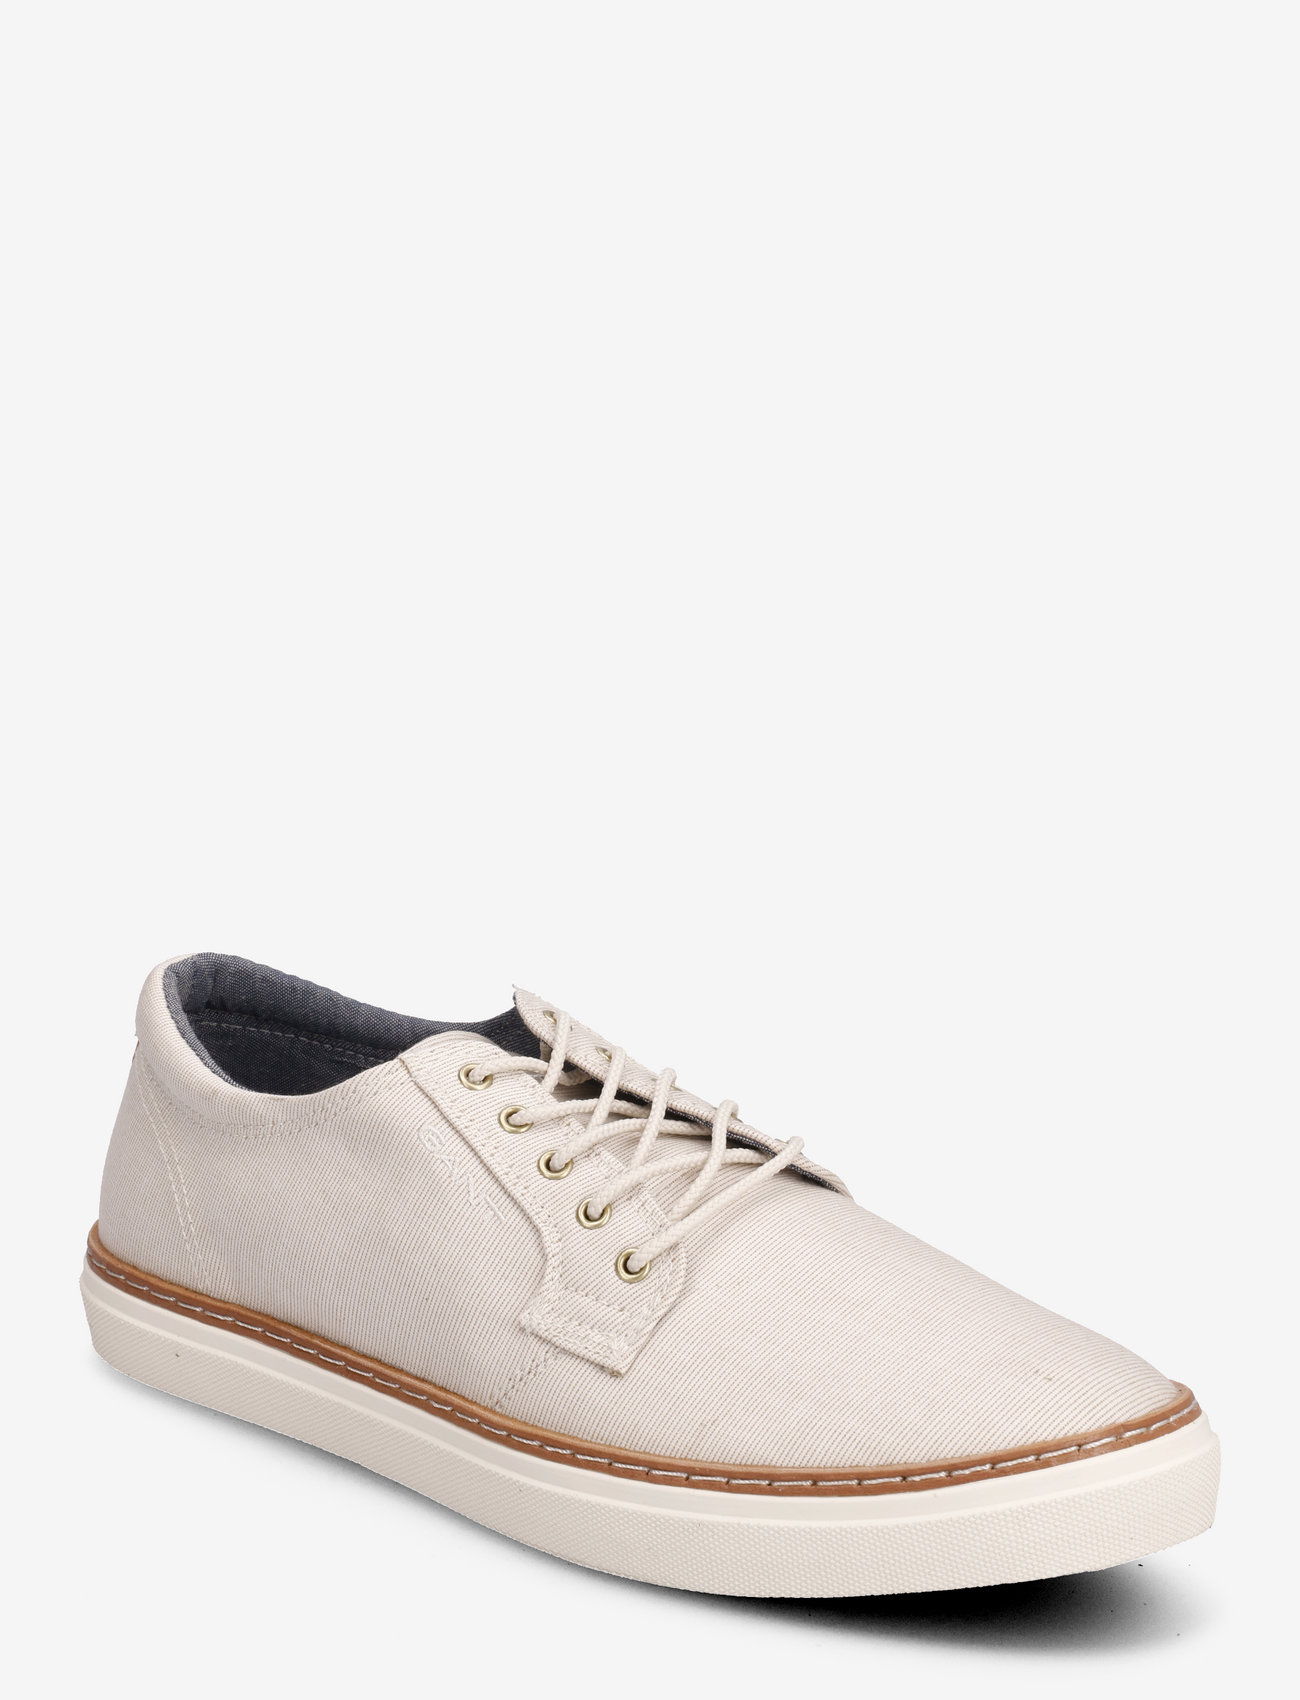 GANT - PREPVILLE - lave sneakers - dry sand - 0